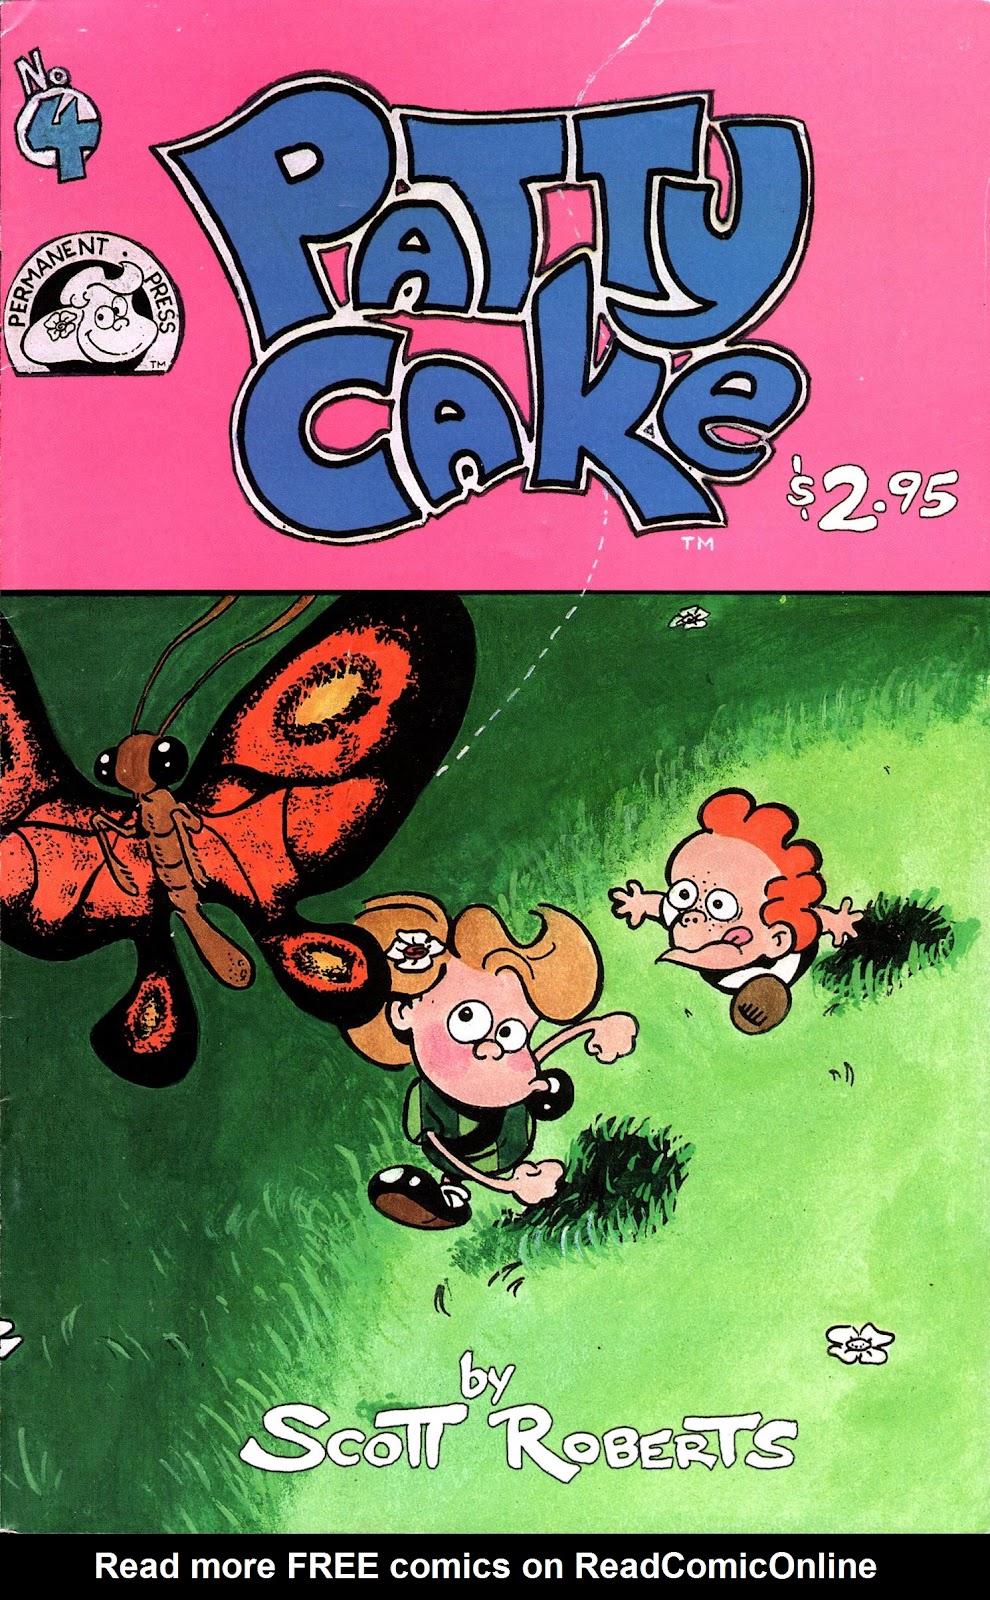 Read online Patty Cake comic -  Issue #4 - 1